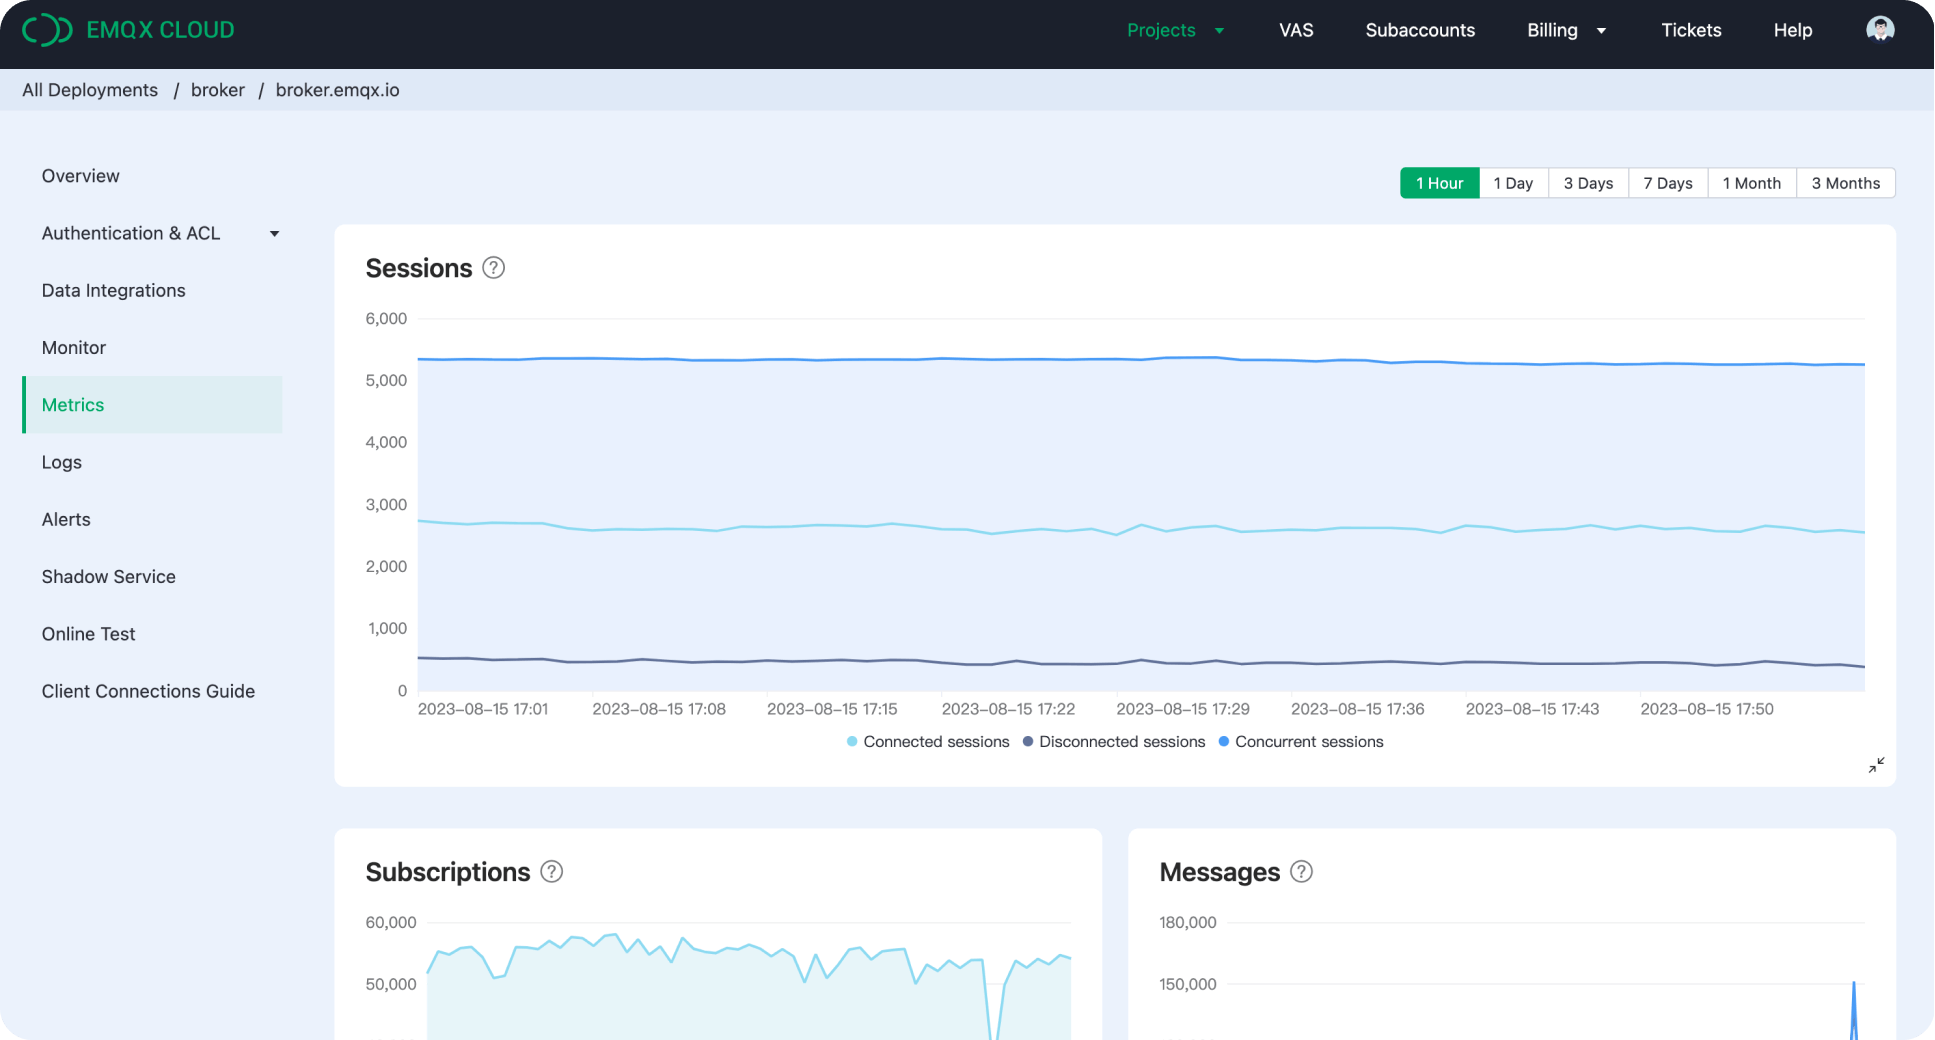 Dashboard Overview 3